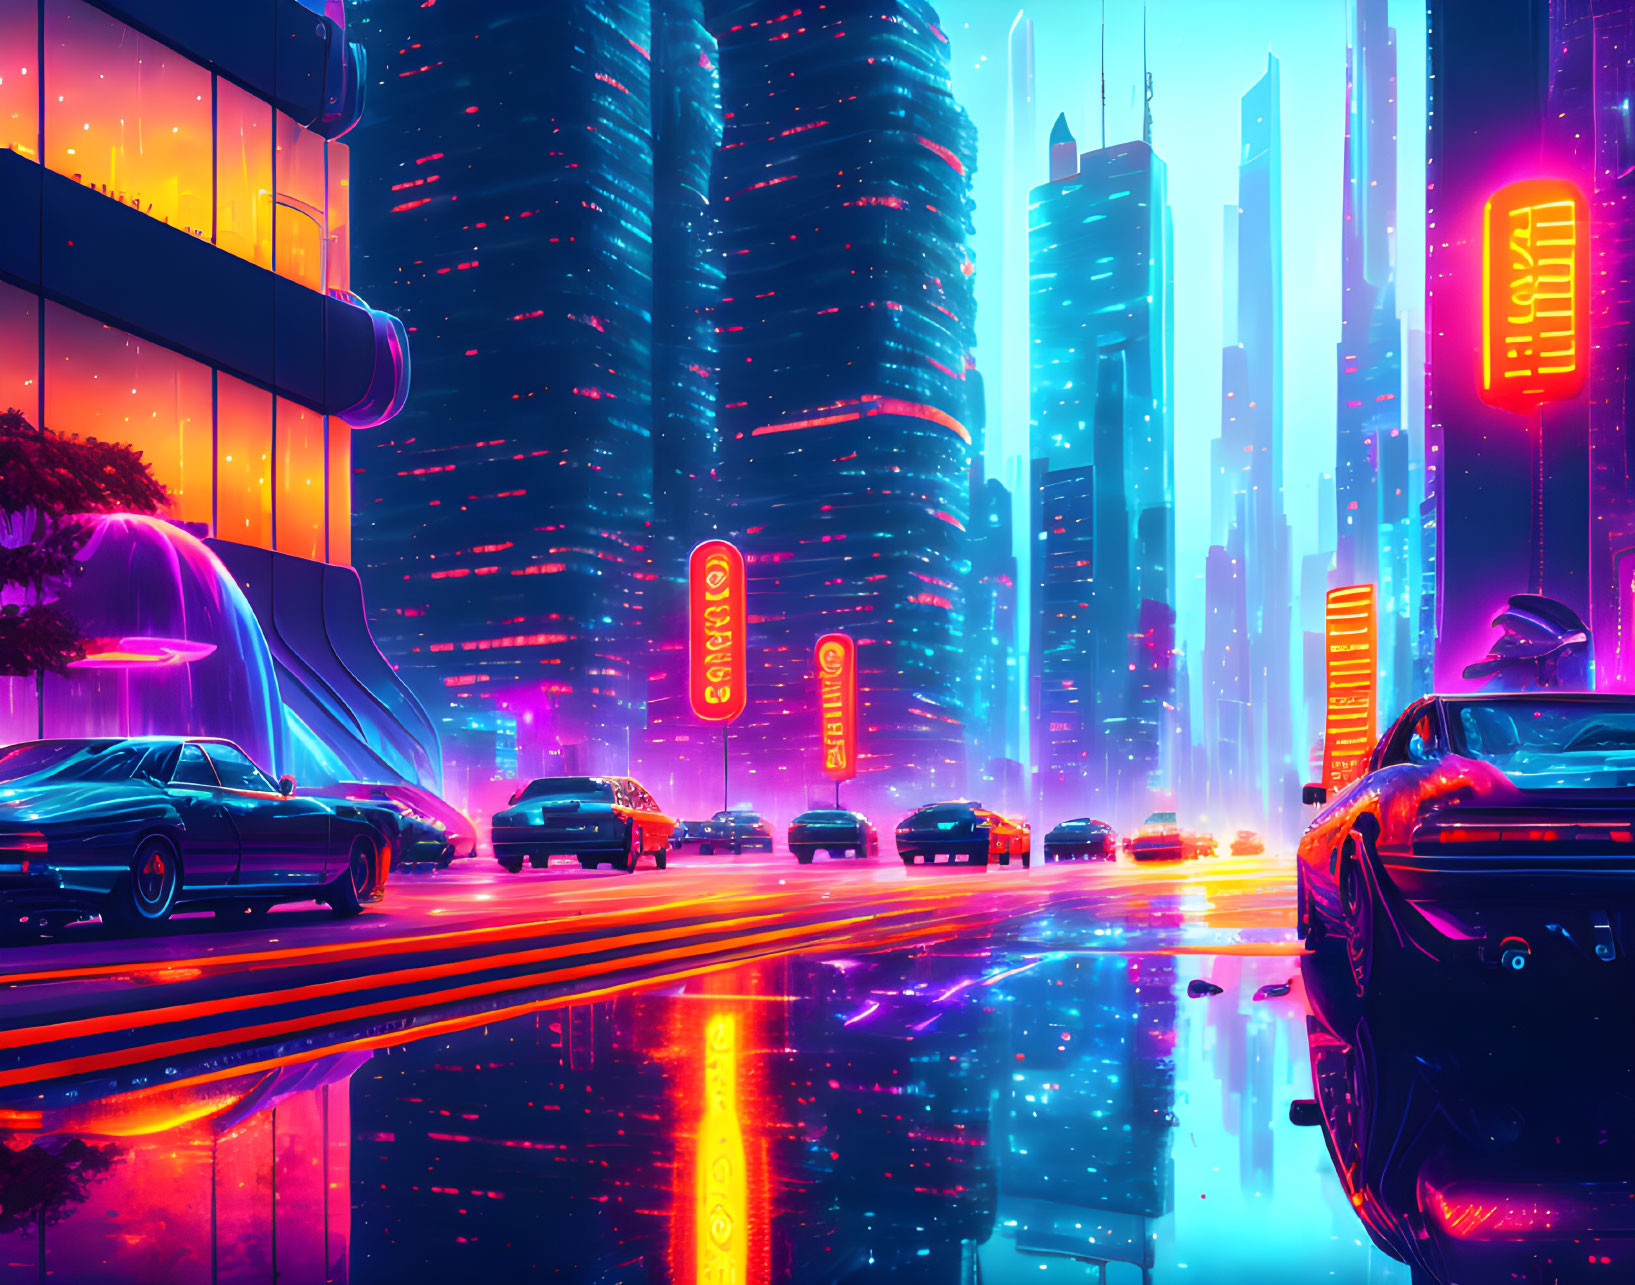 Futuristic cityscape with neon lights, skyscrapers, sleek cars, and twilight sky